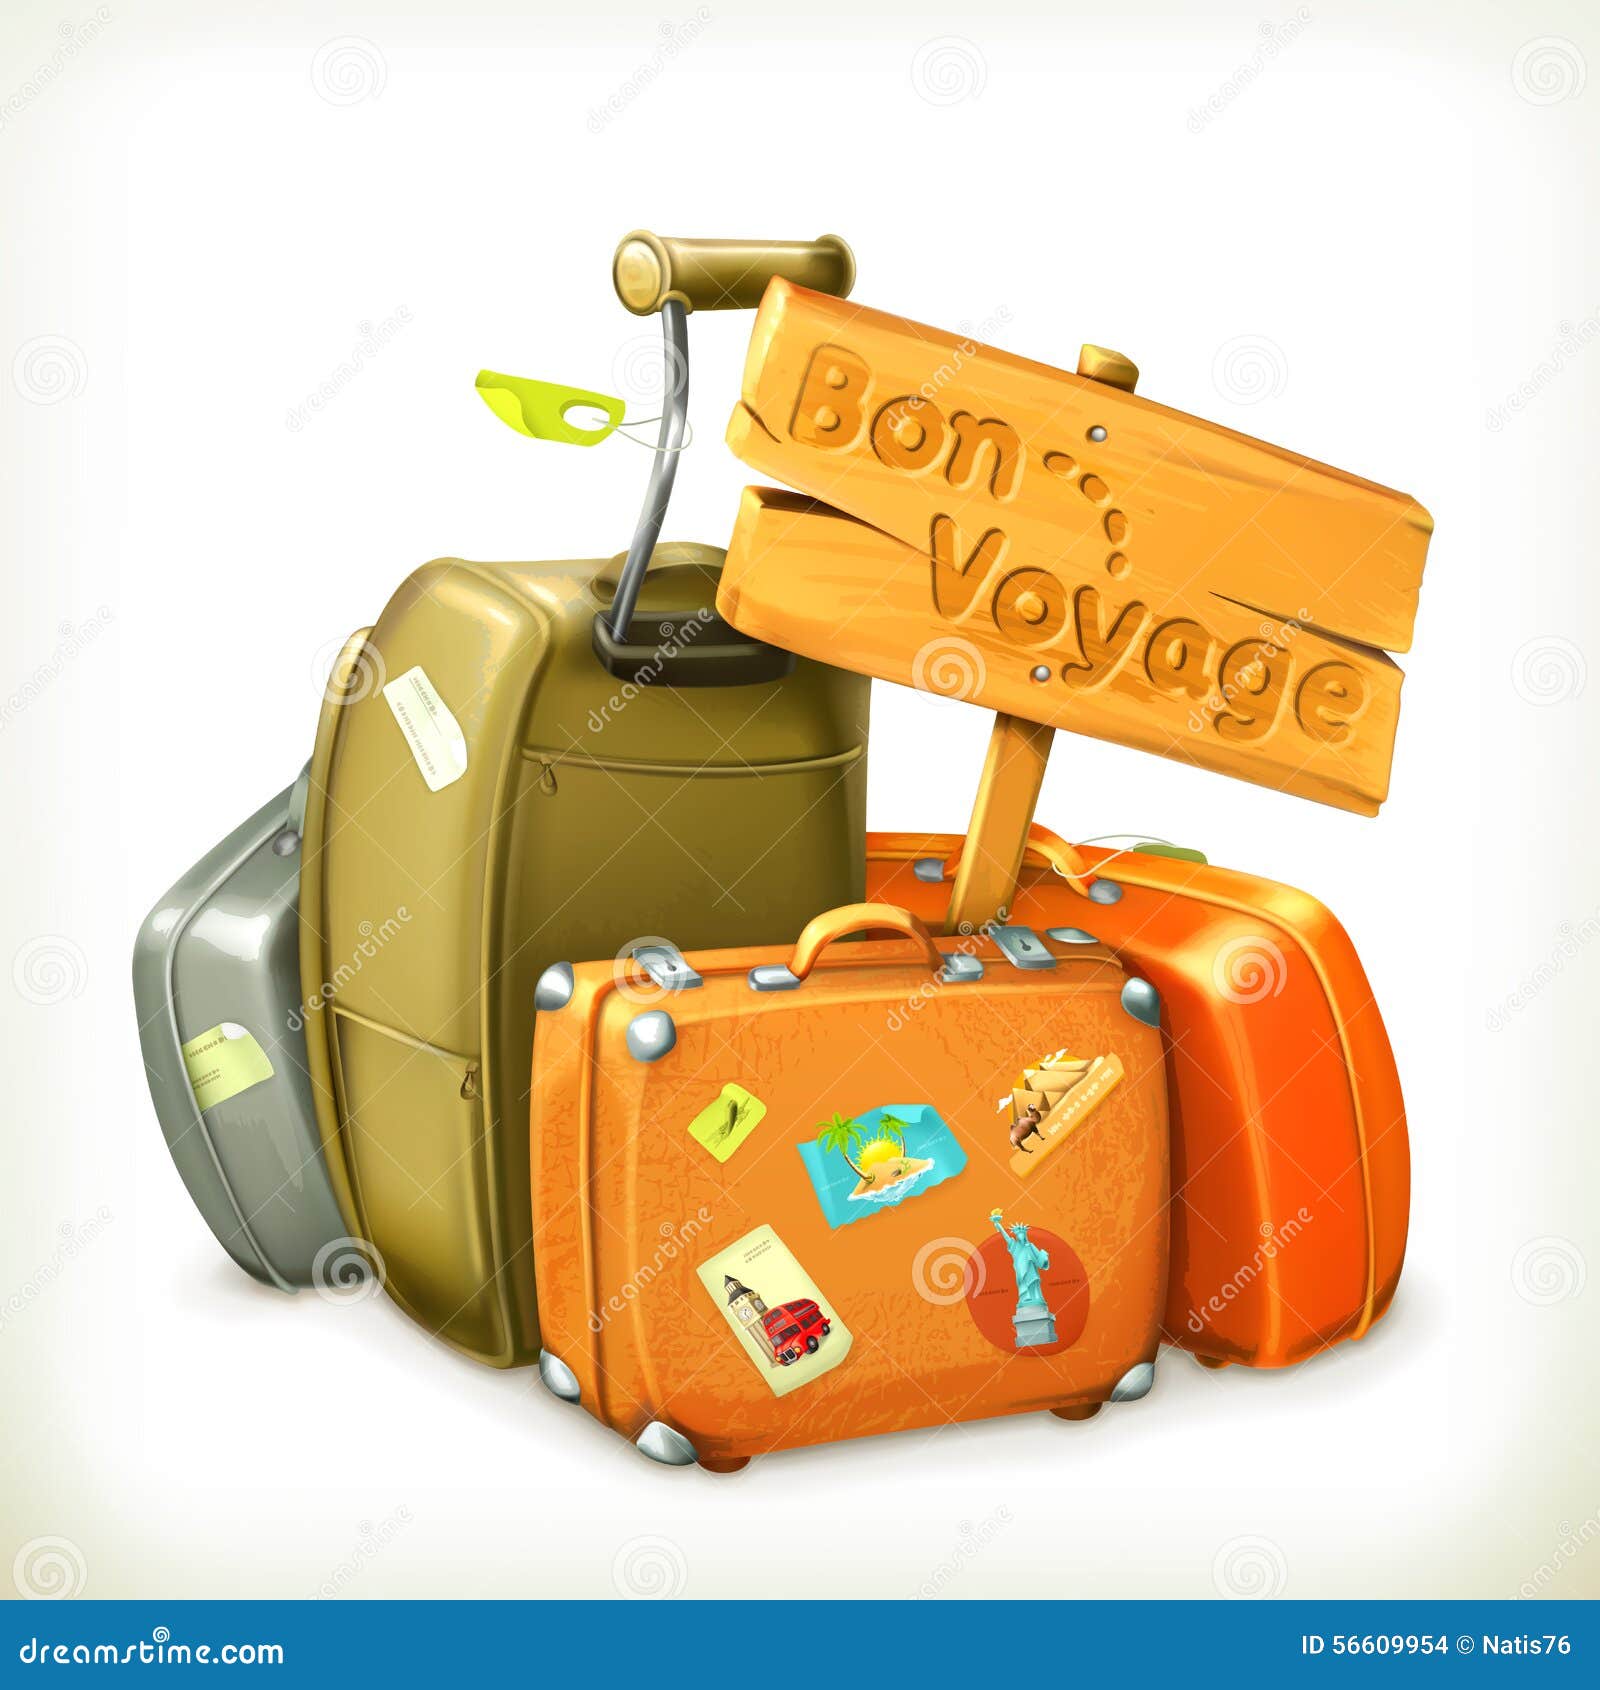 bon voyage sign and travel bags